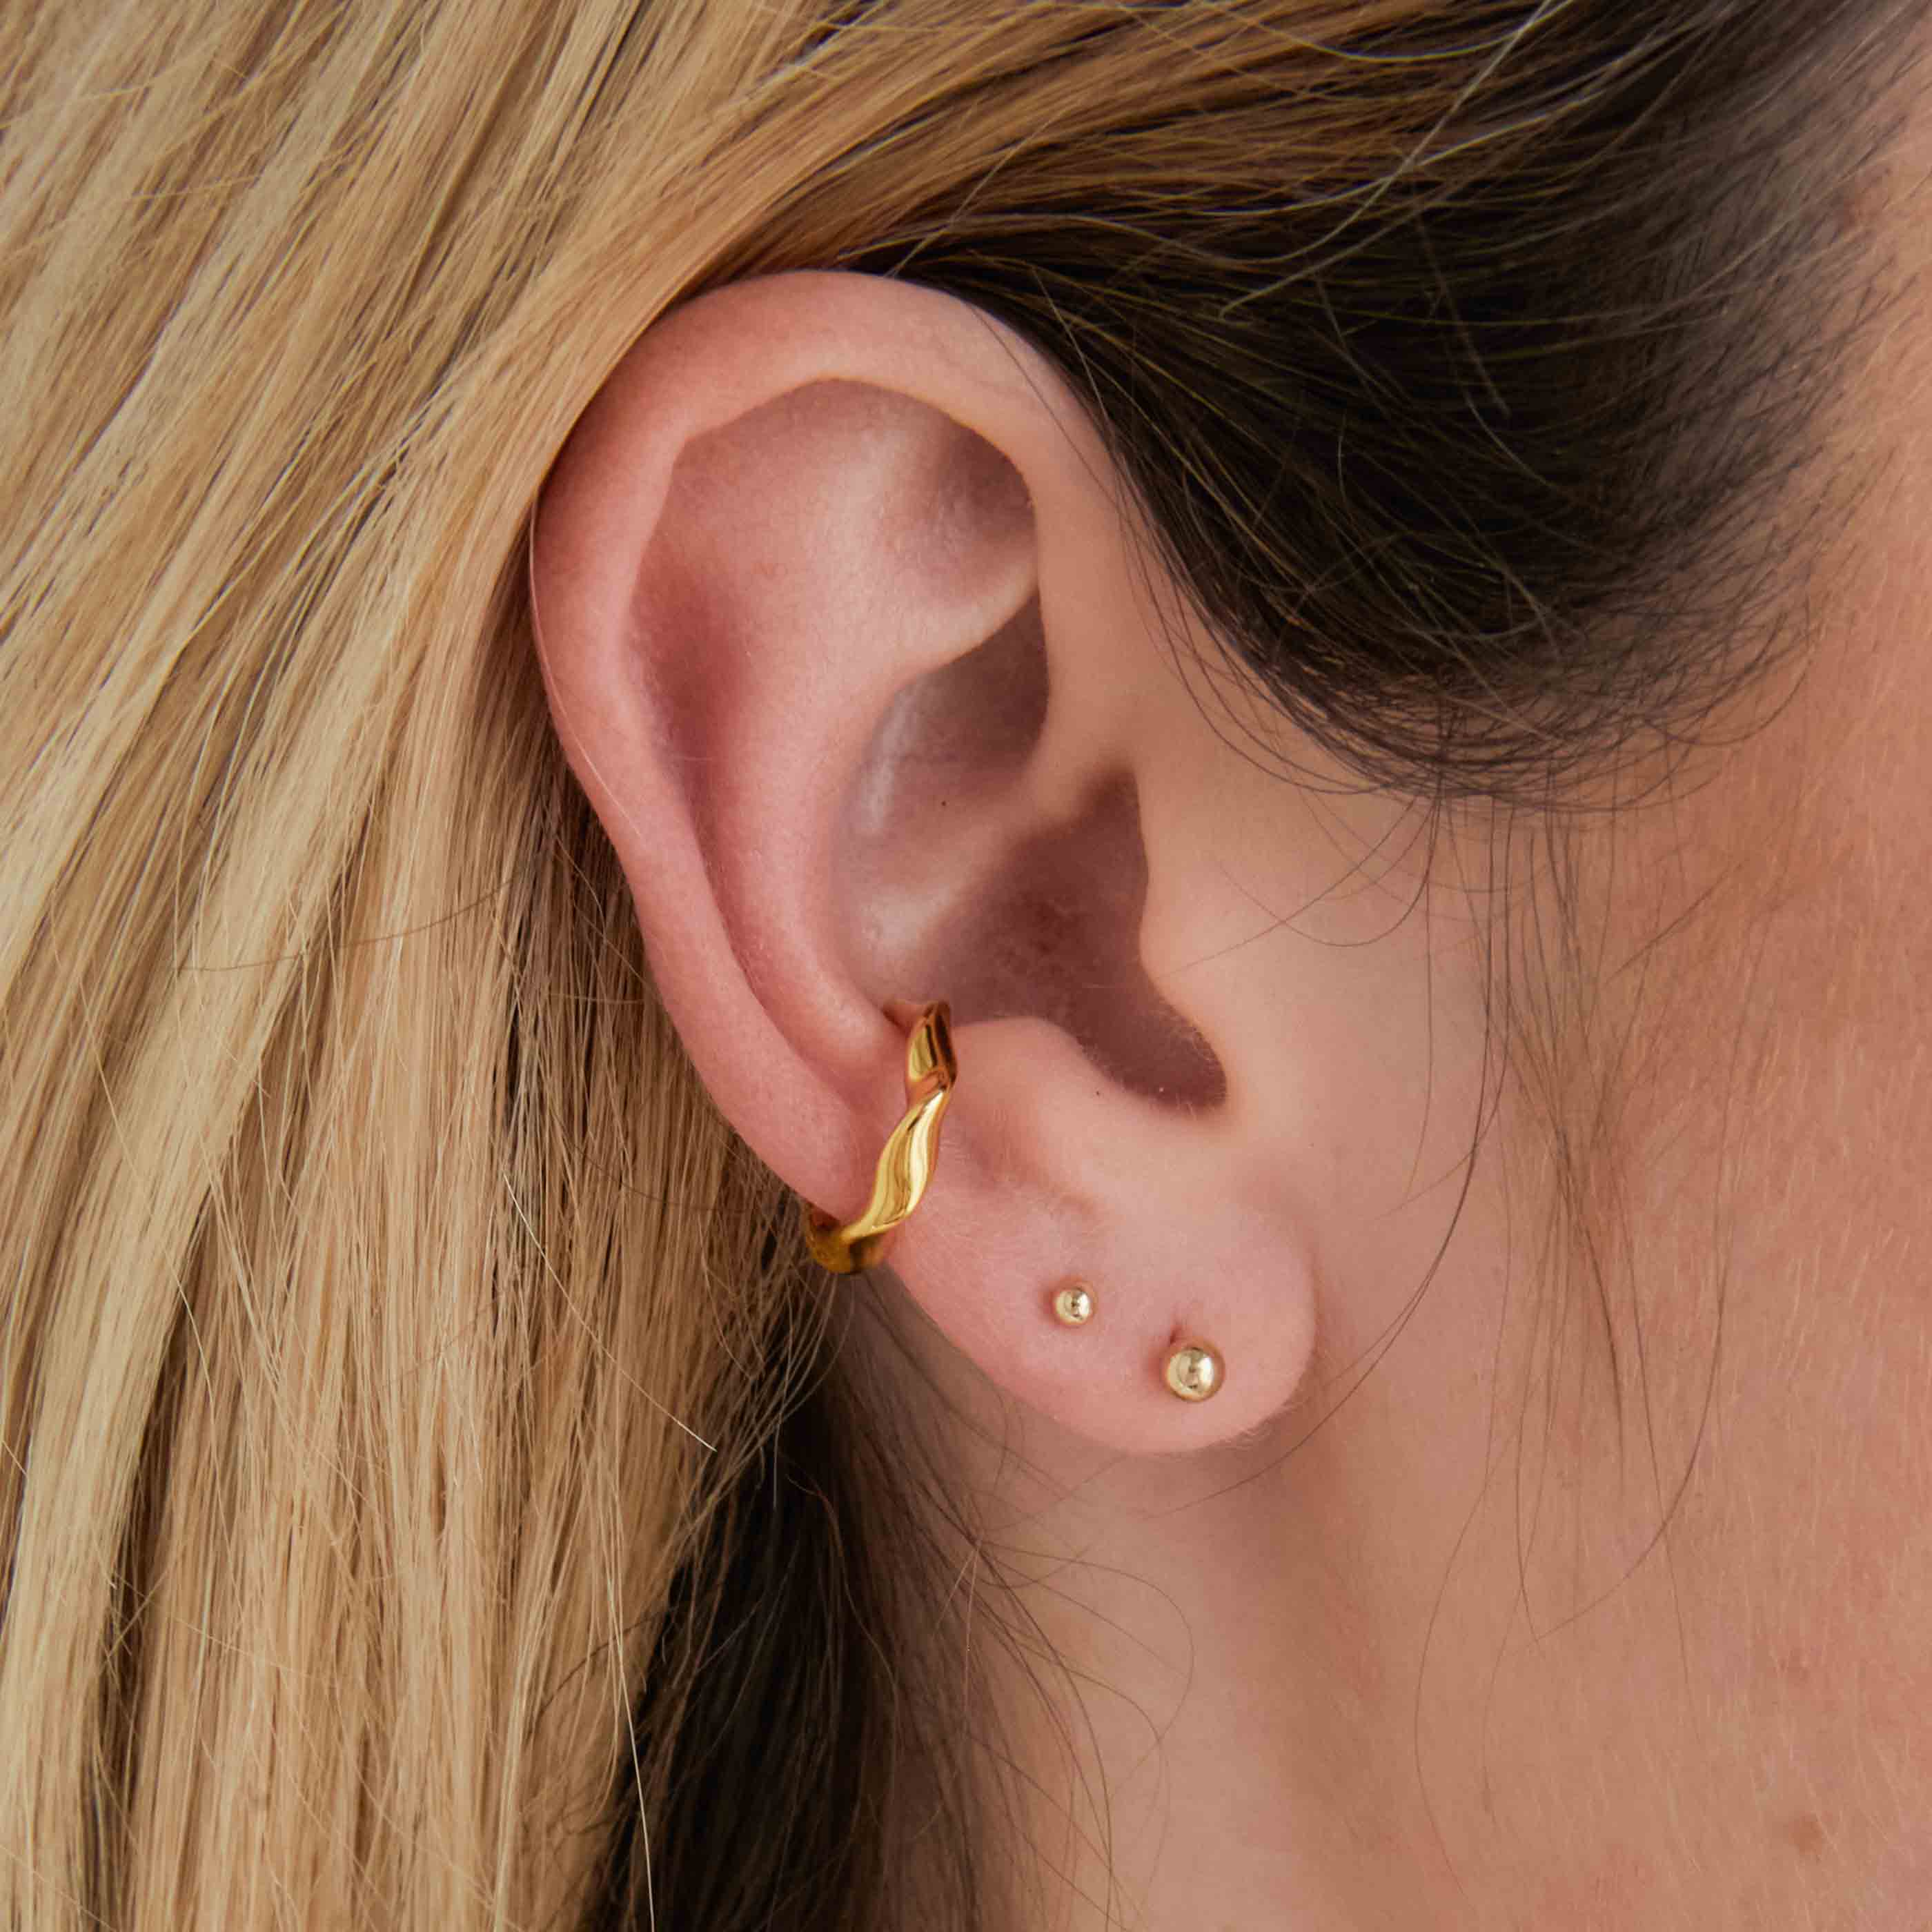 Tragus Earring 14k Solid Gold Tragus Jewelry Flower Tragus  Etsy  Tragus  jewelry Tragus earrings Gold earrings studs